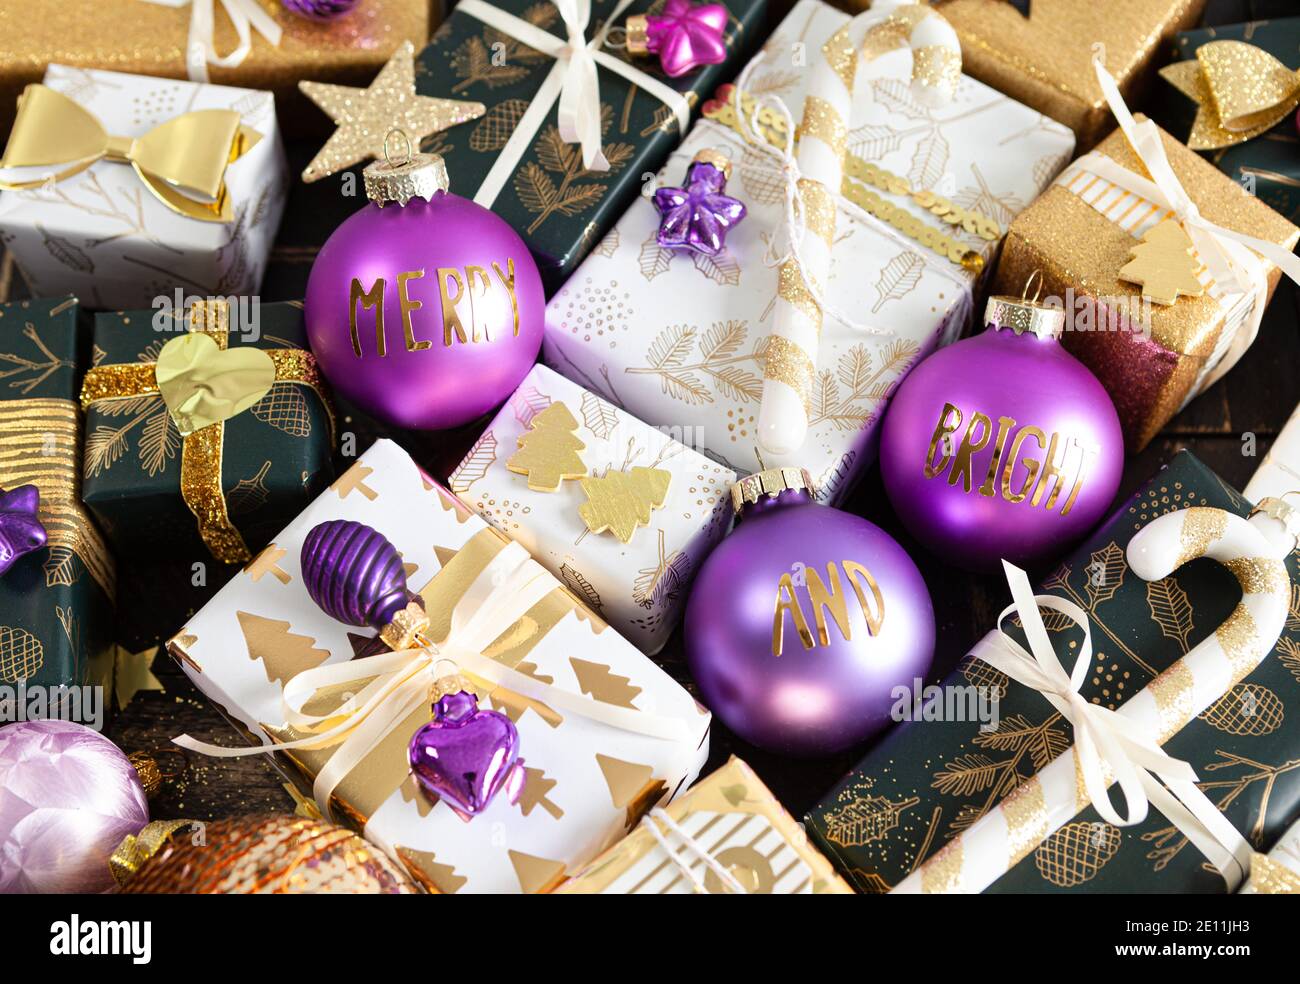 Festive Gift Wrapped Presents Stock Photo